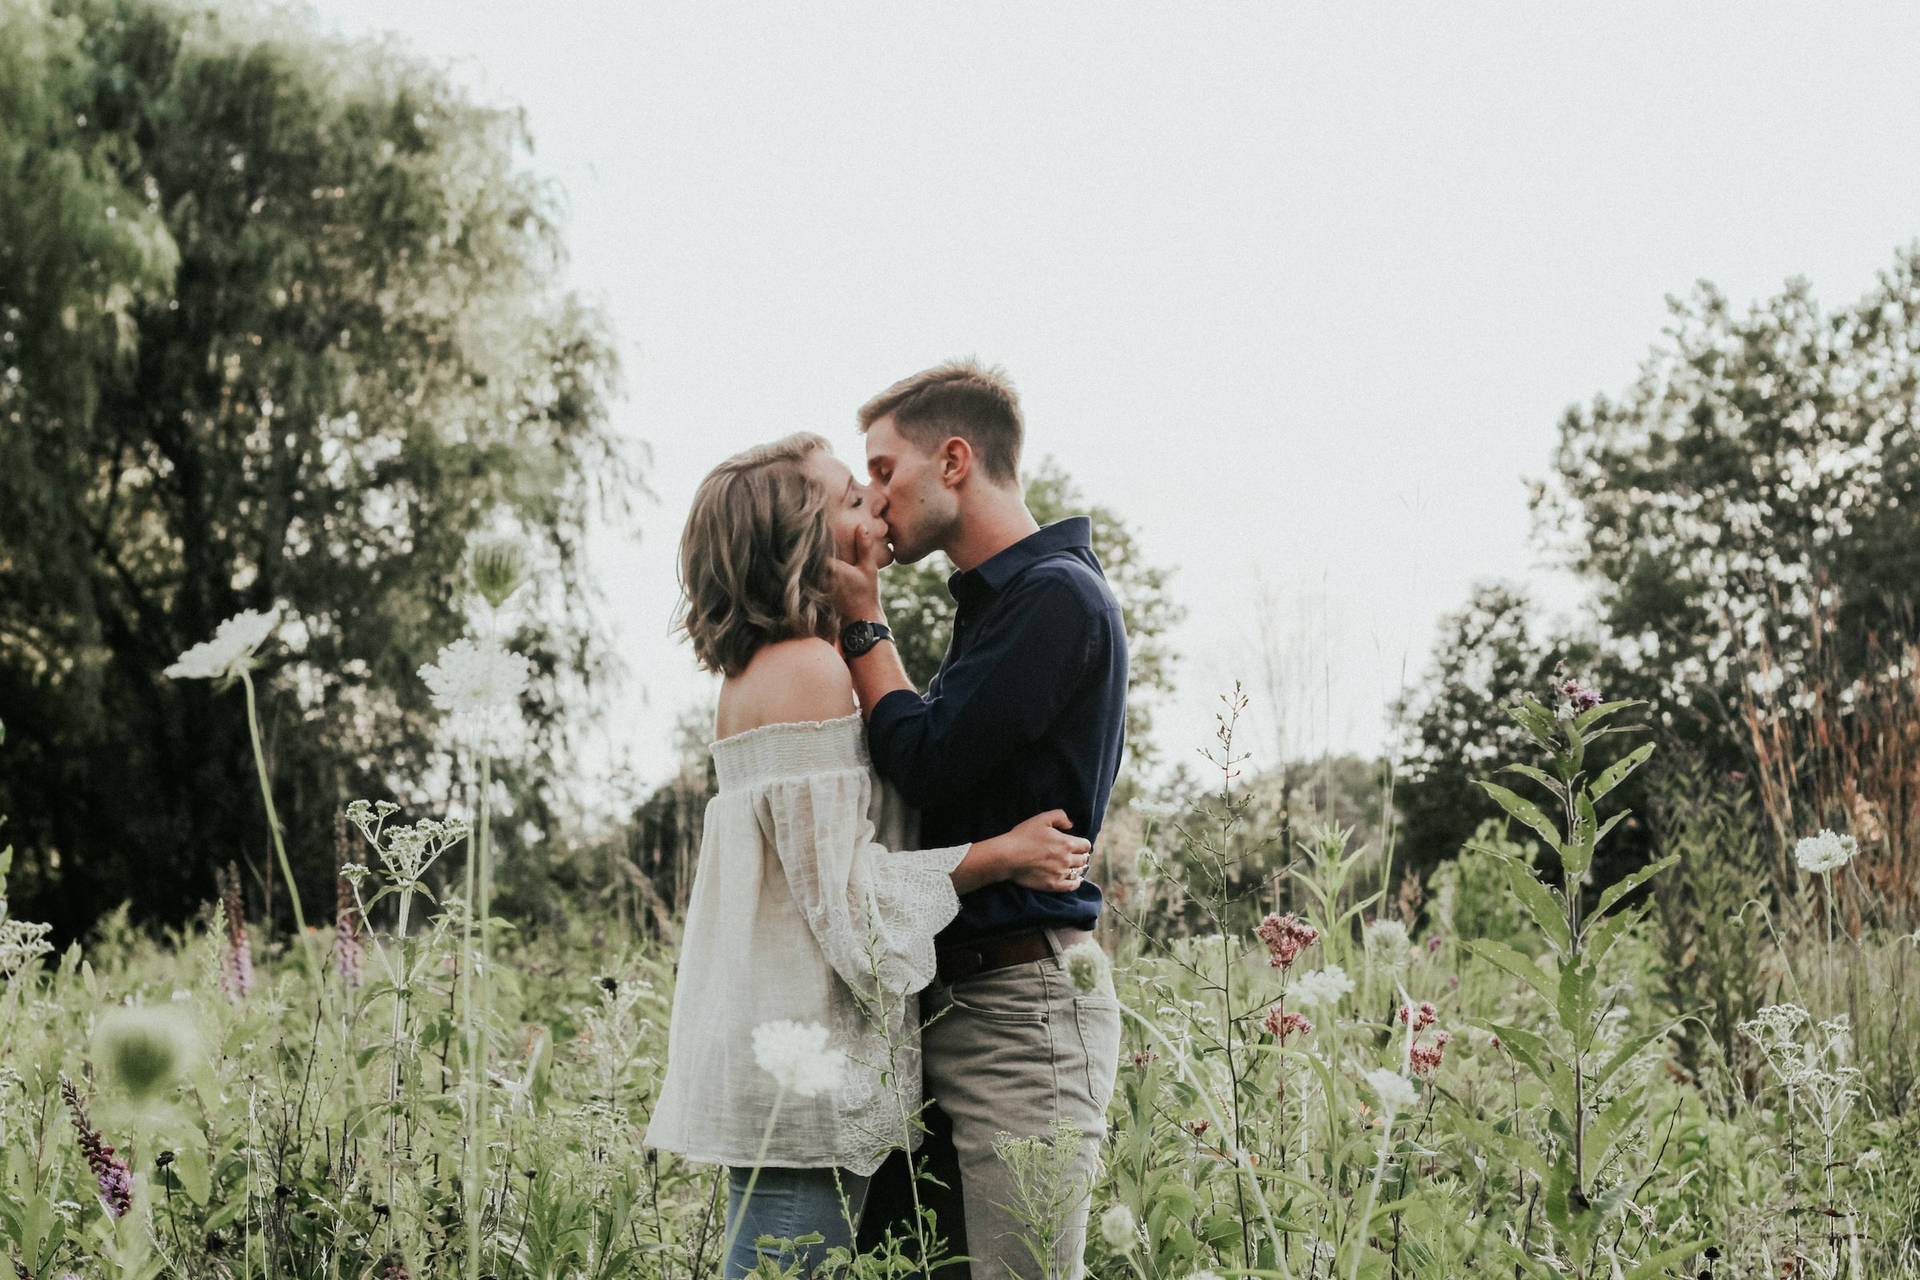 Couple Hugging And Kissing On Grassy Field Wallpaper